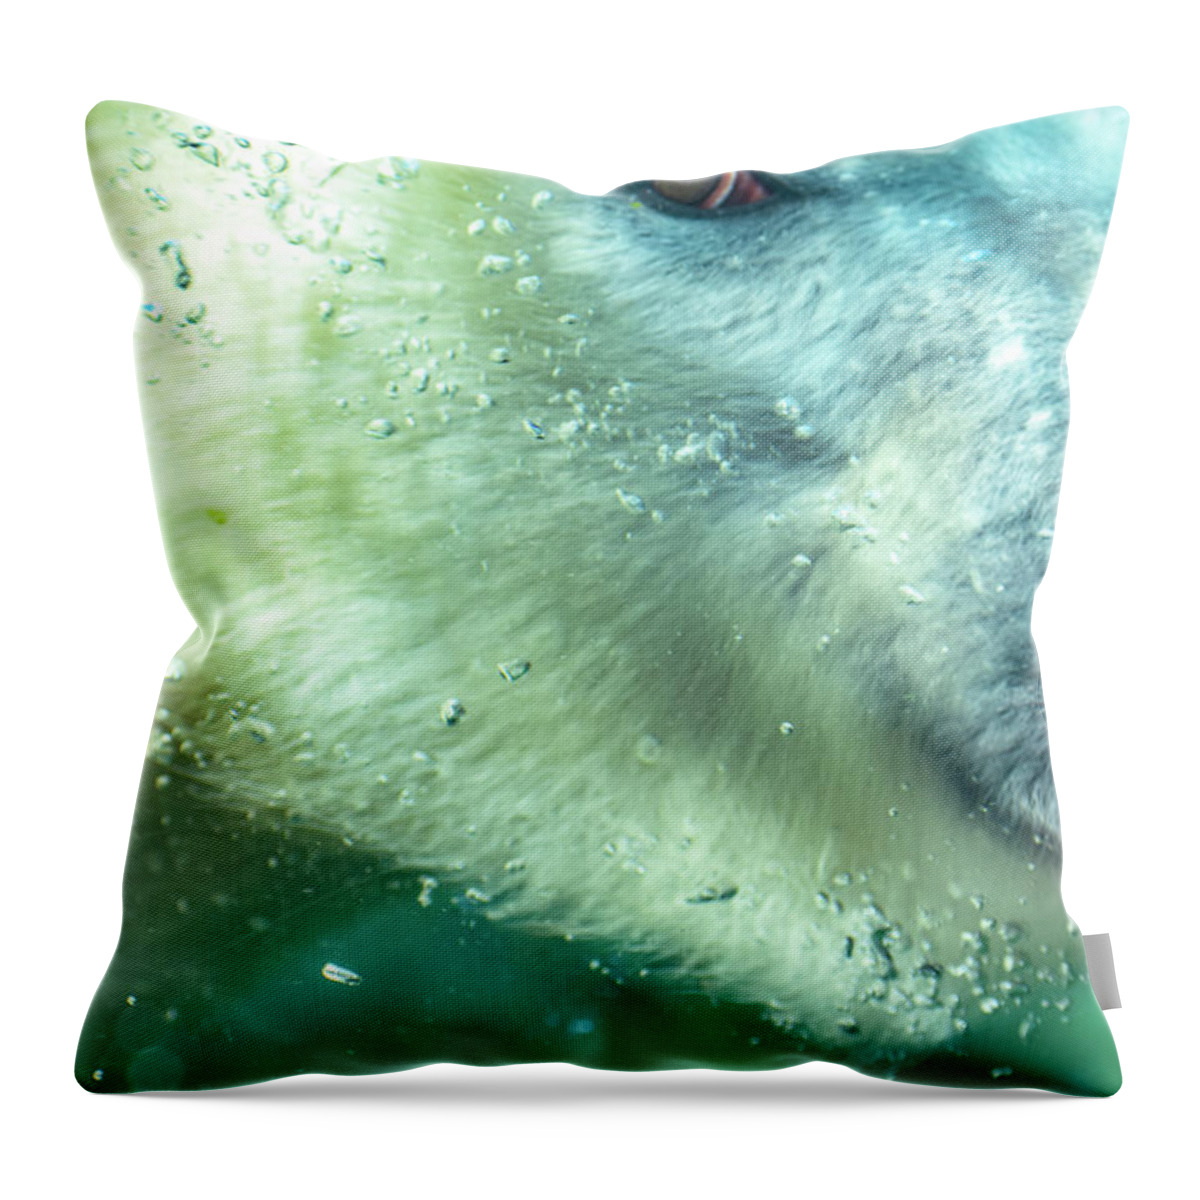 Polar Bear Throw Pillow featuring the photograph Under Water Polar Bear by Michelle Wittensoldner